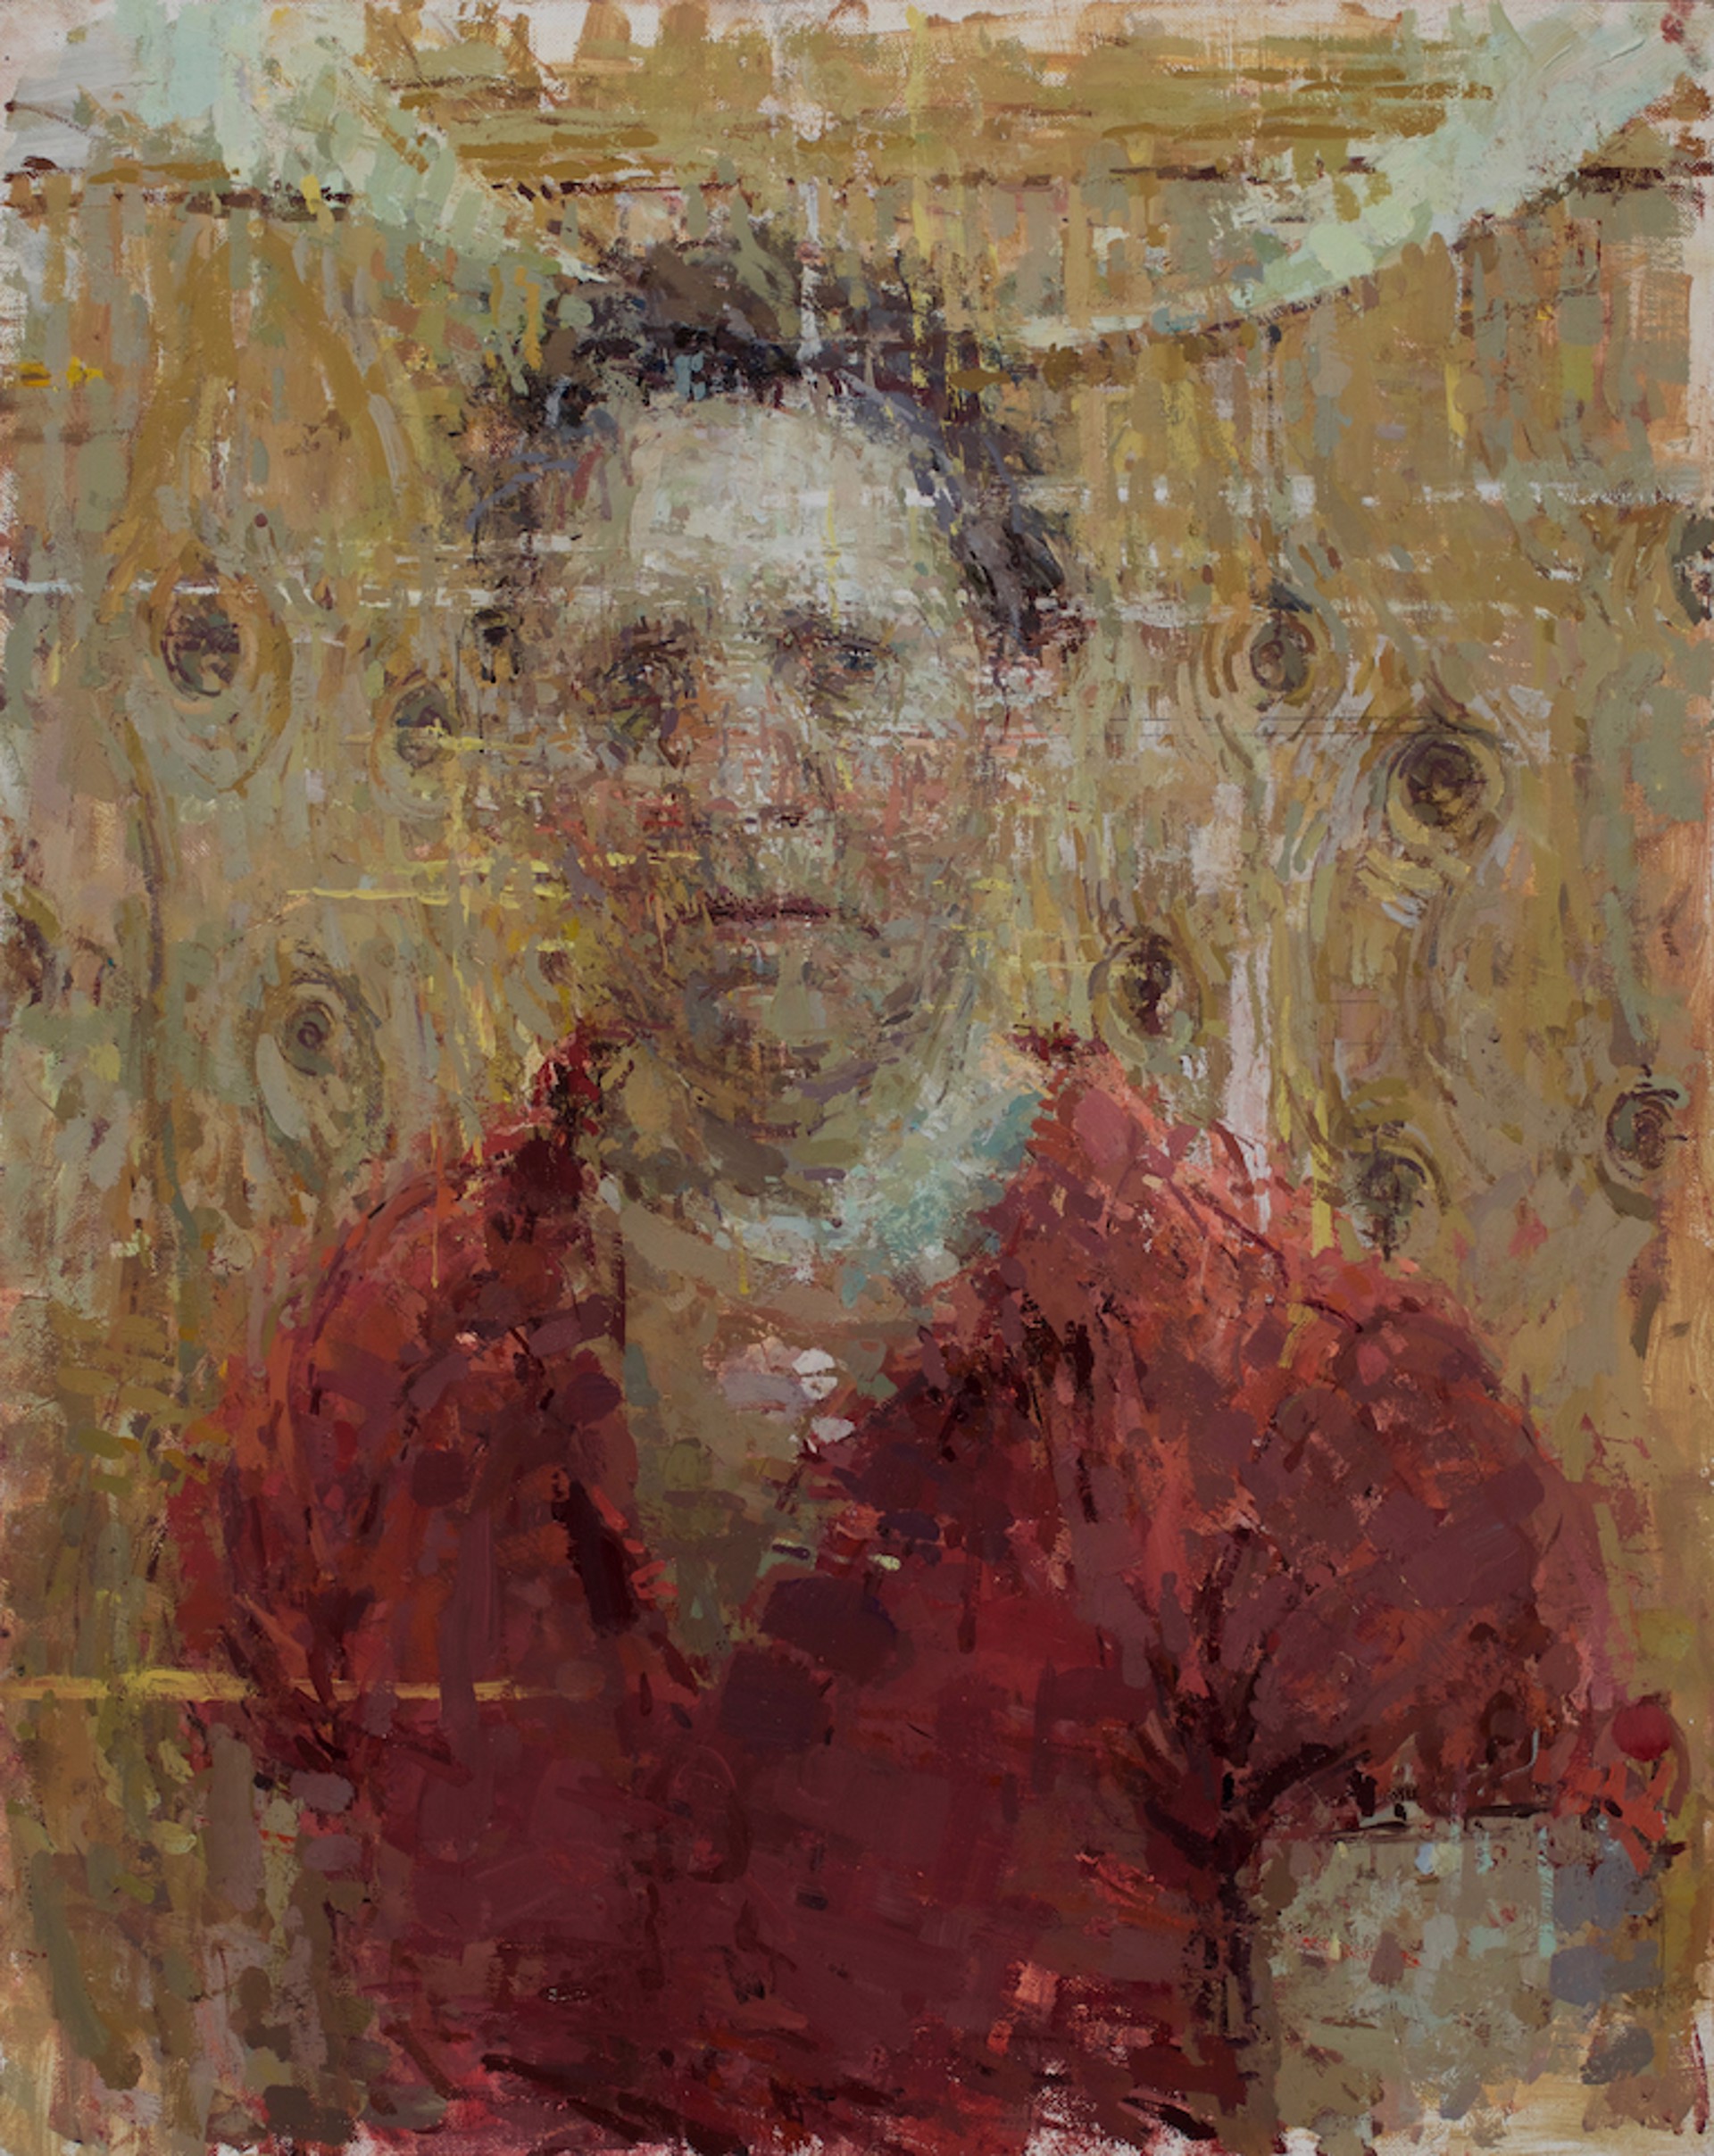 Self Portrait with Knots by Ann Gale